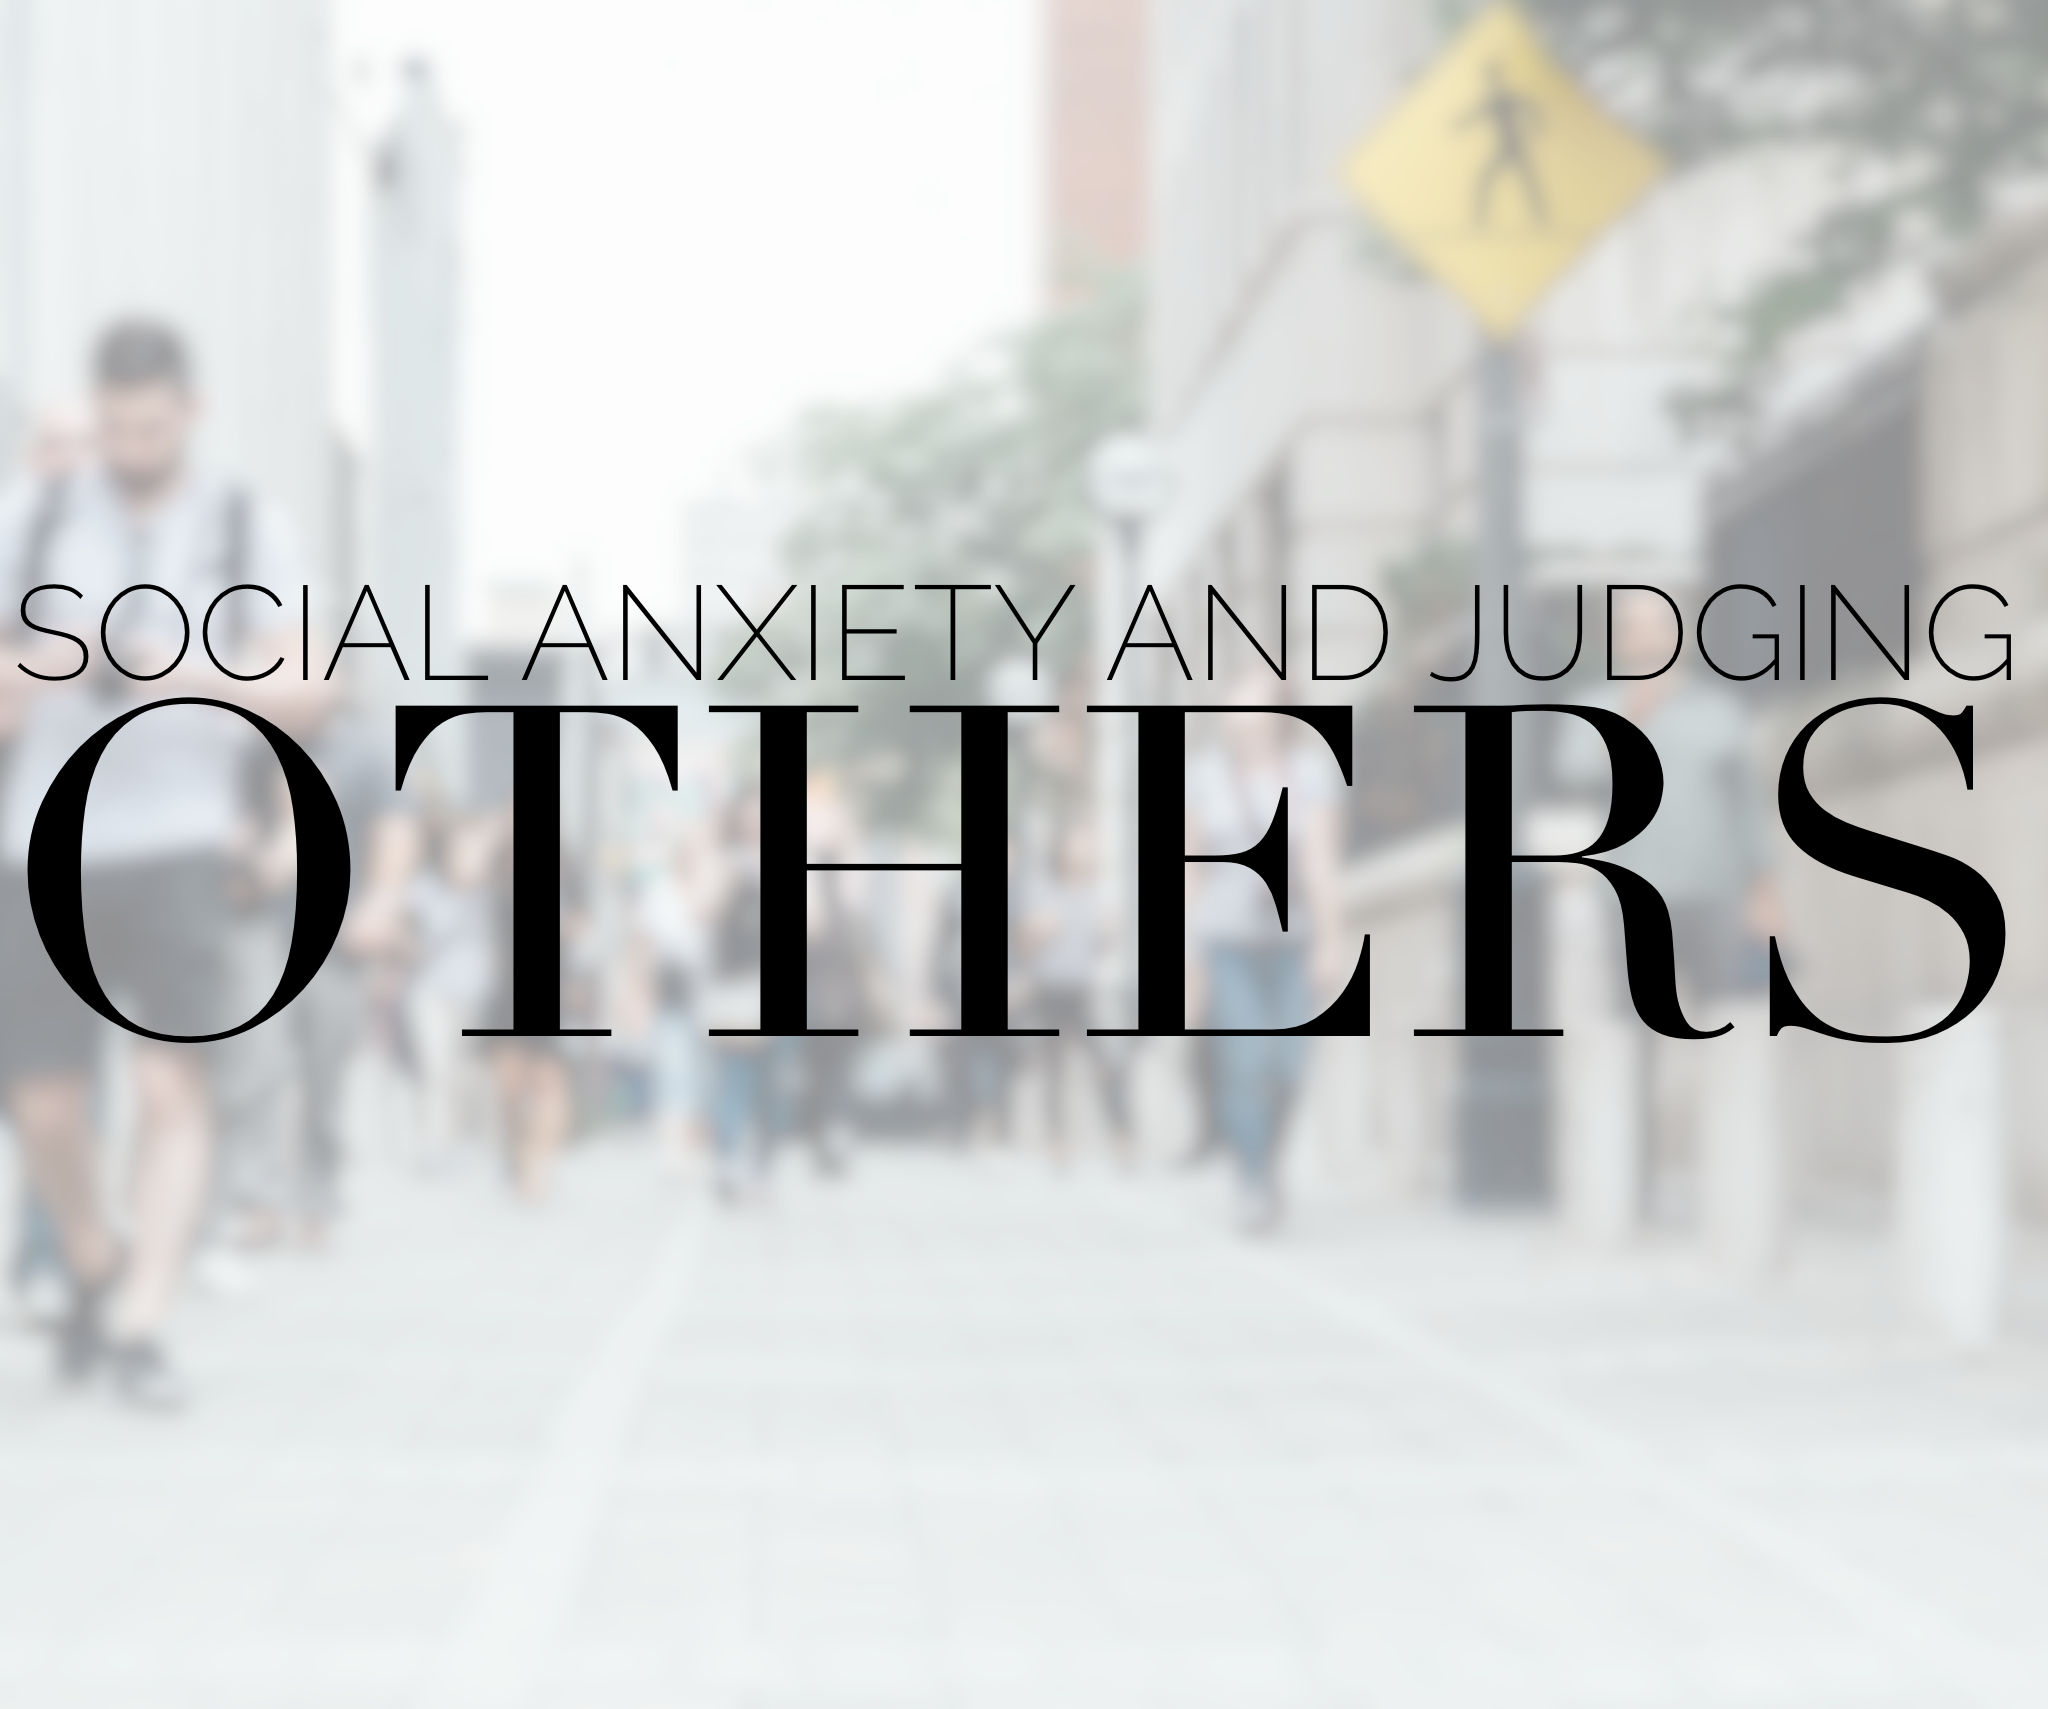 social anxiety and judging others devotional diva